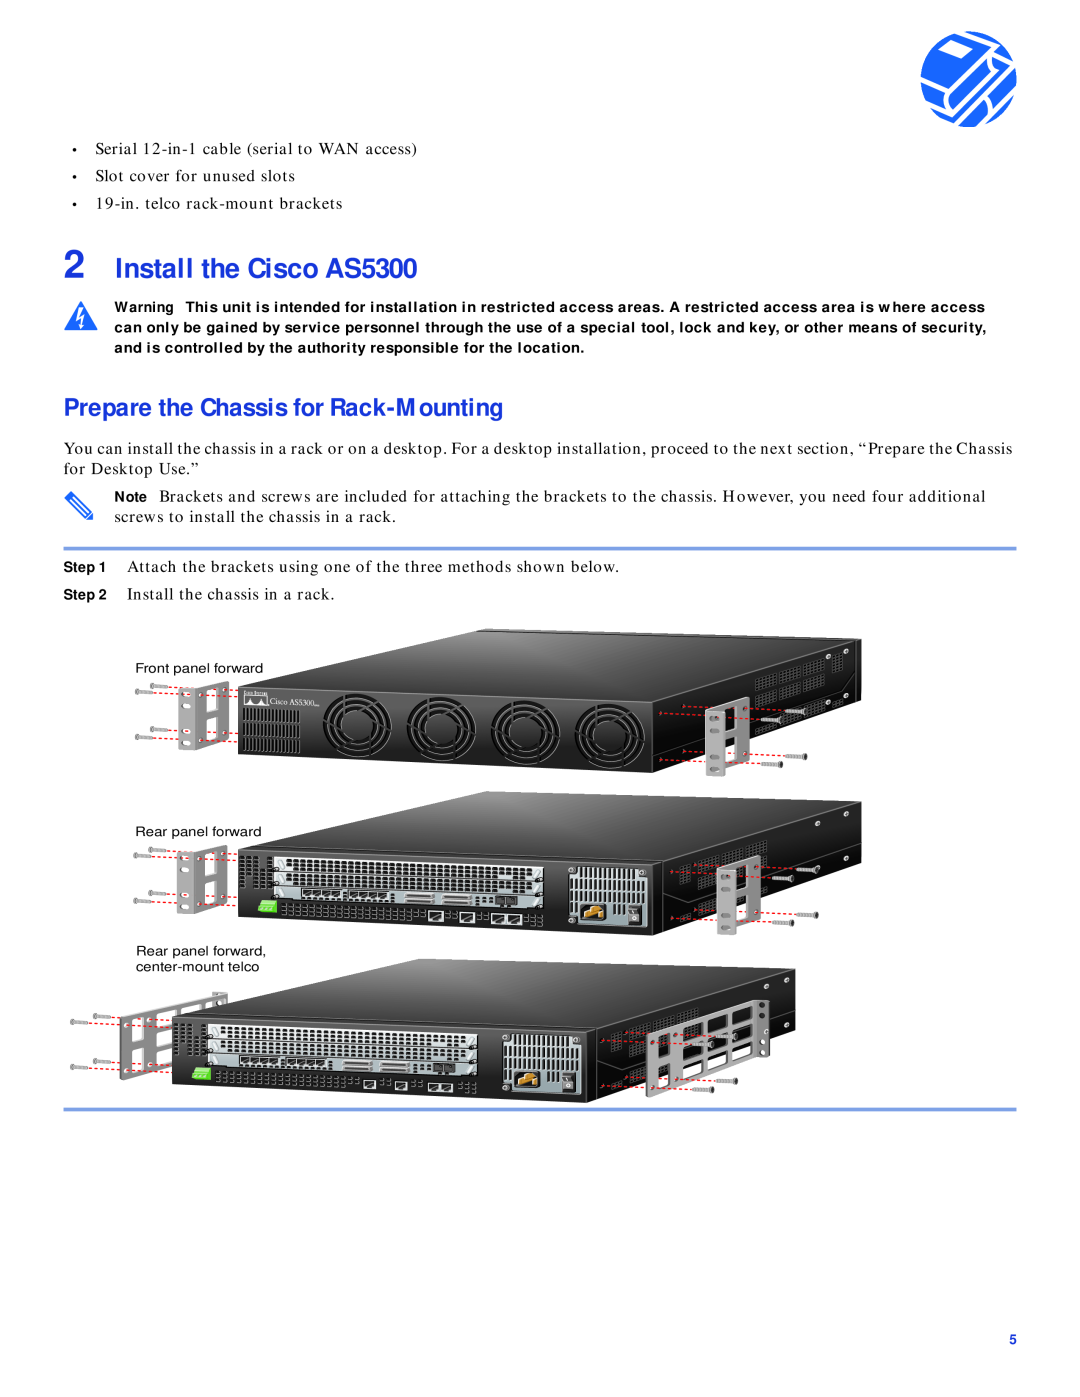 Cisco Systems quick start Install the Cisco AS5300, Prepare the Chassis for Rack-Mounting 